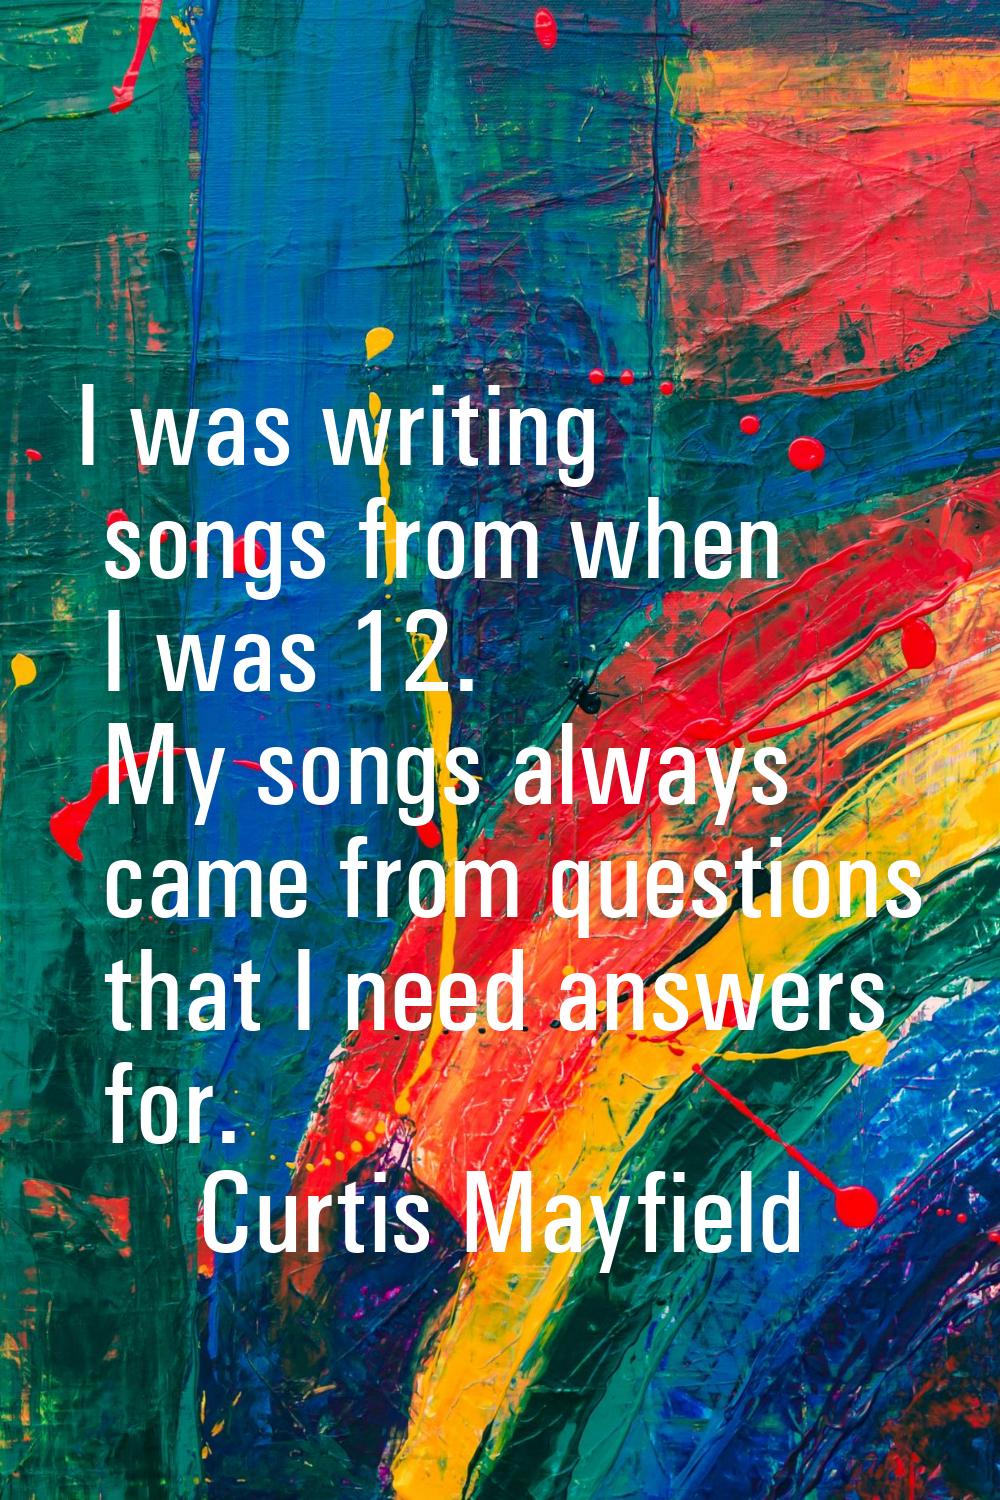 I was writing songs from when I was 12. My songs always came from questions that I need answers for